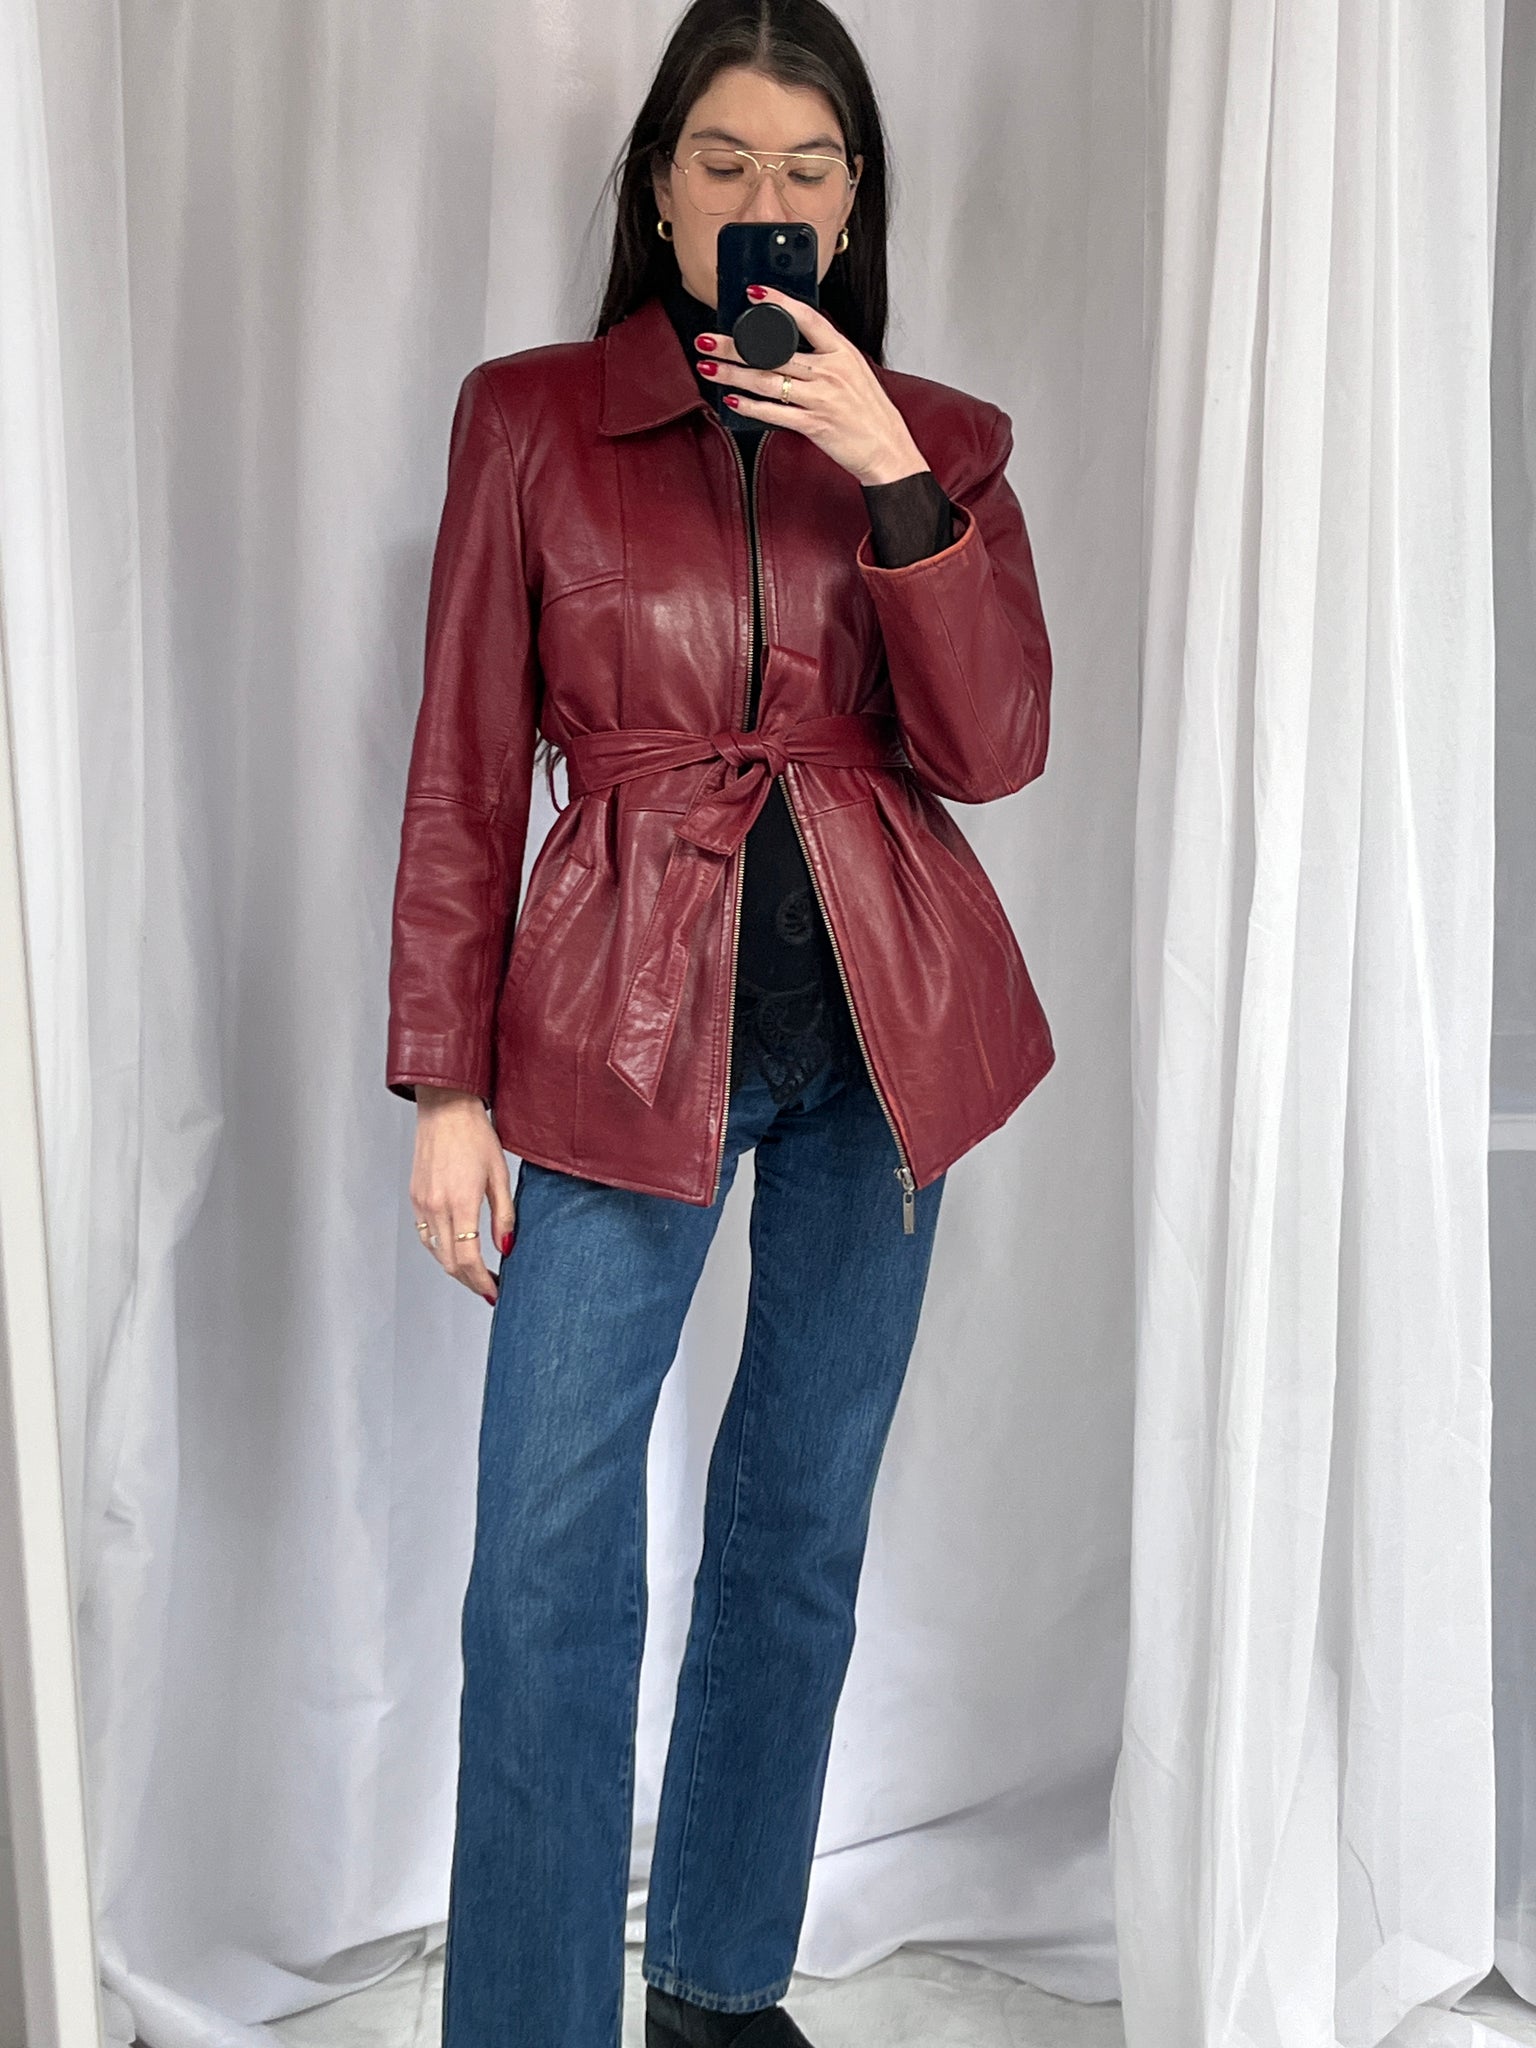 Vintage Wilsons faded red leather jacket